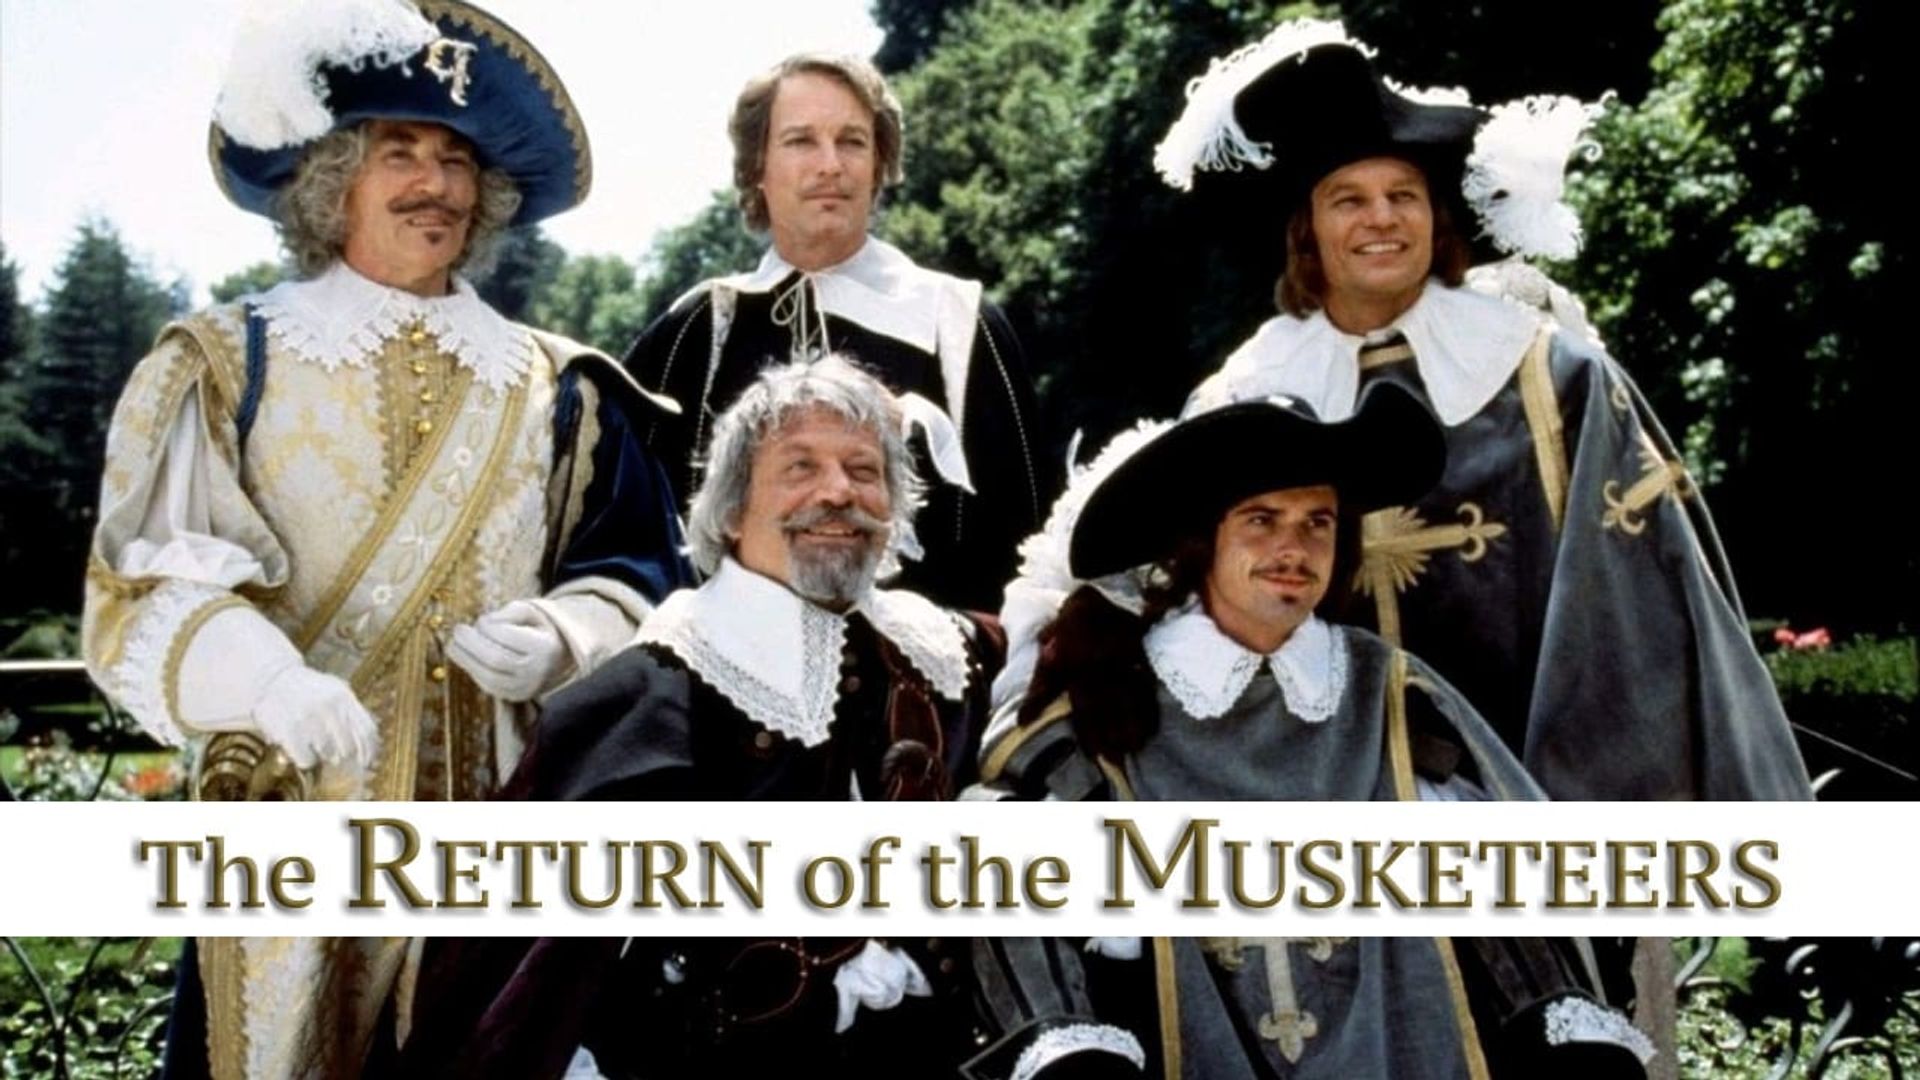 The Return of the Musketeers Backdrop